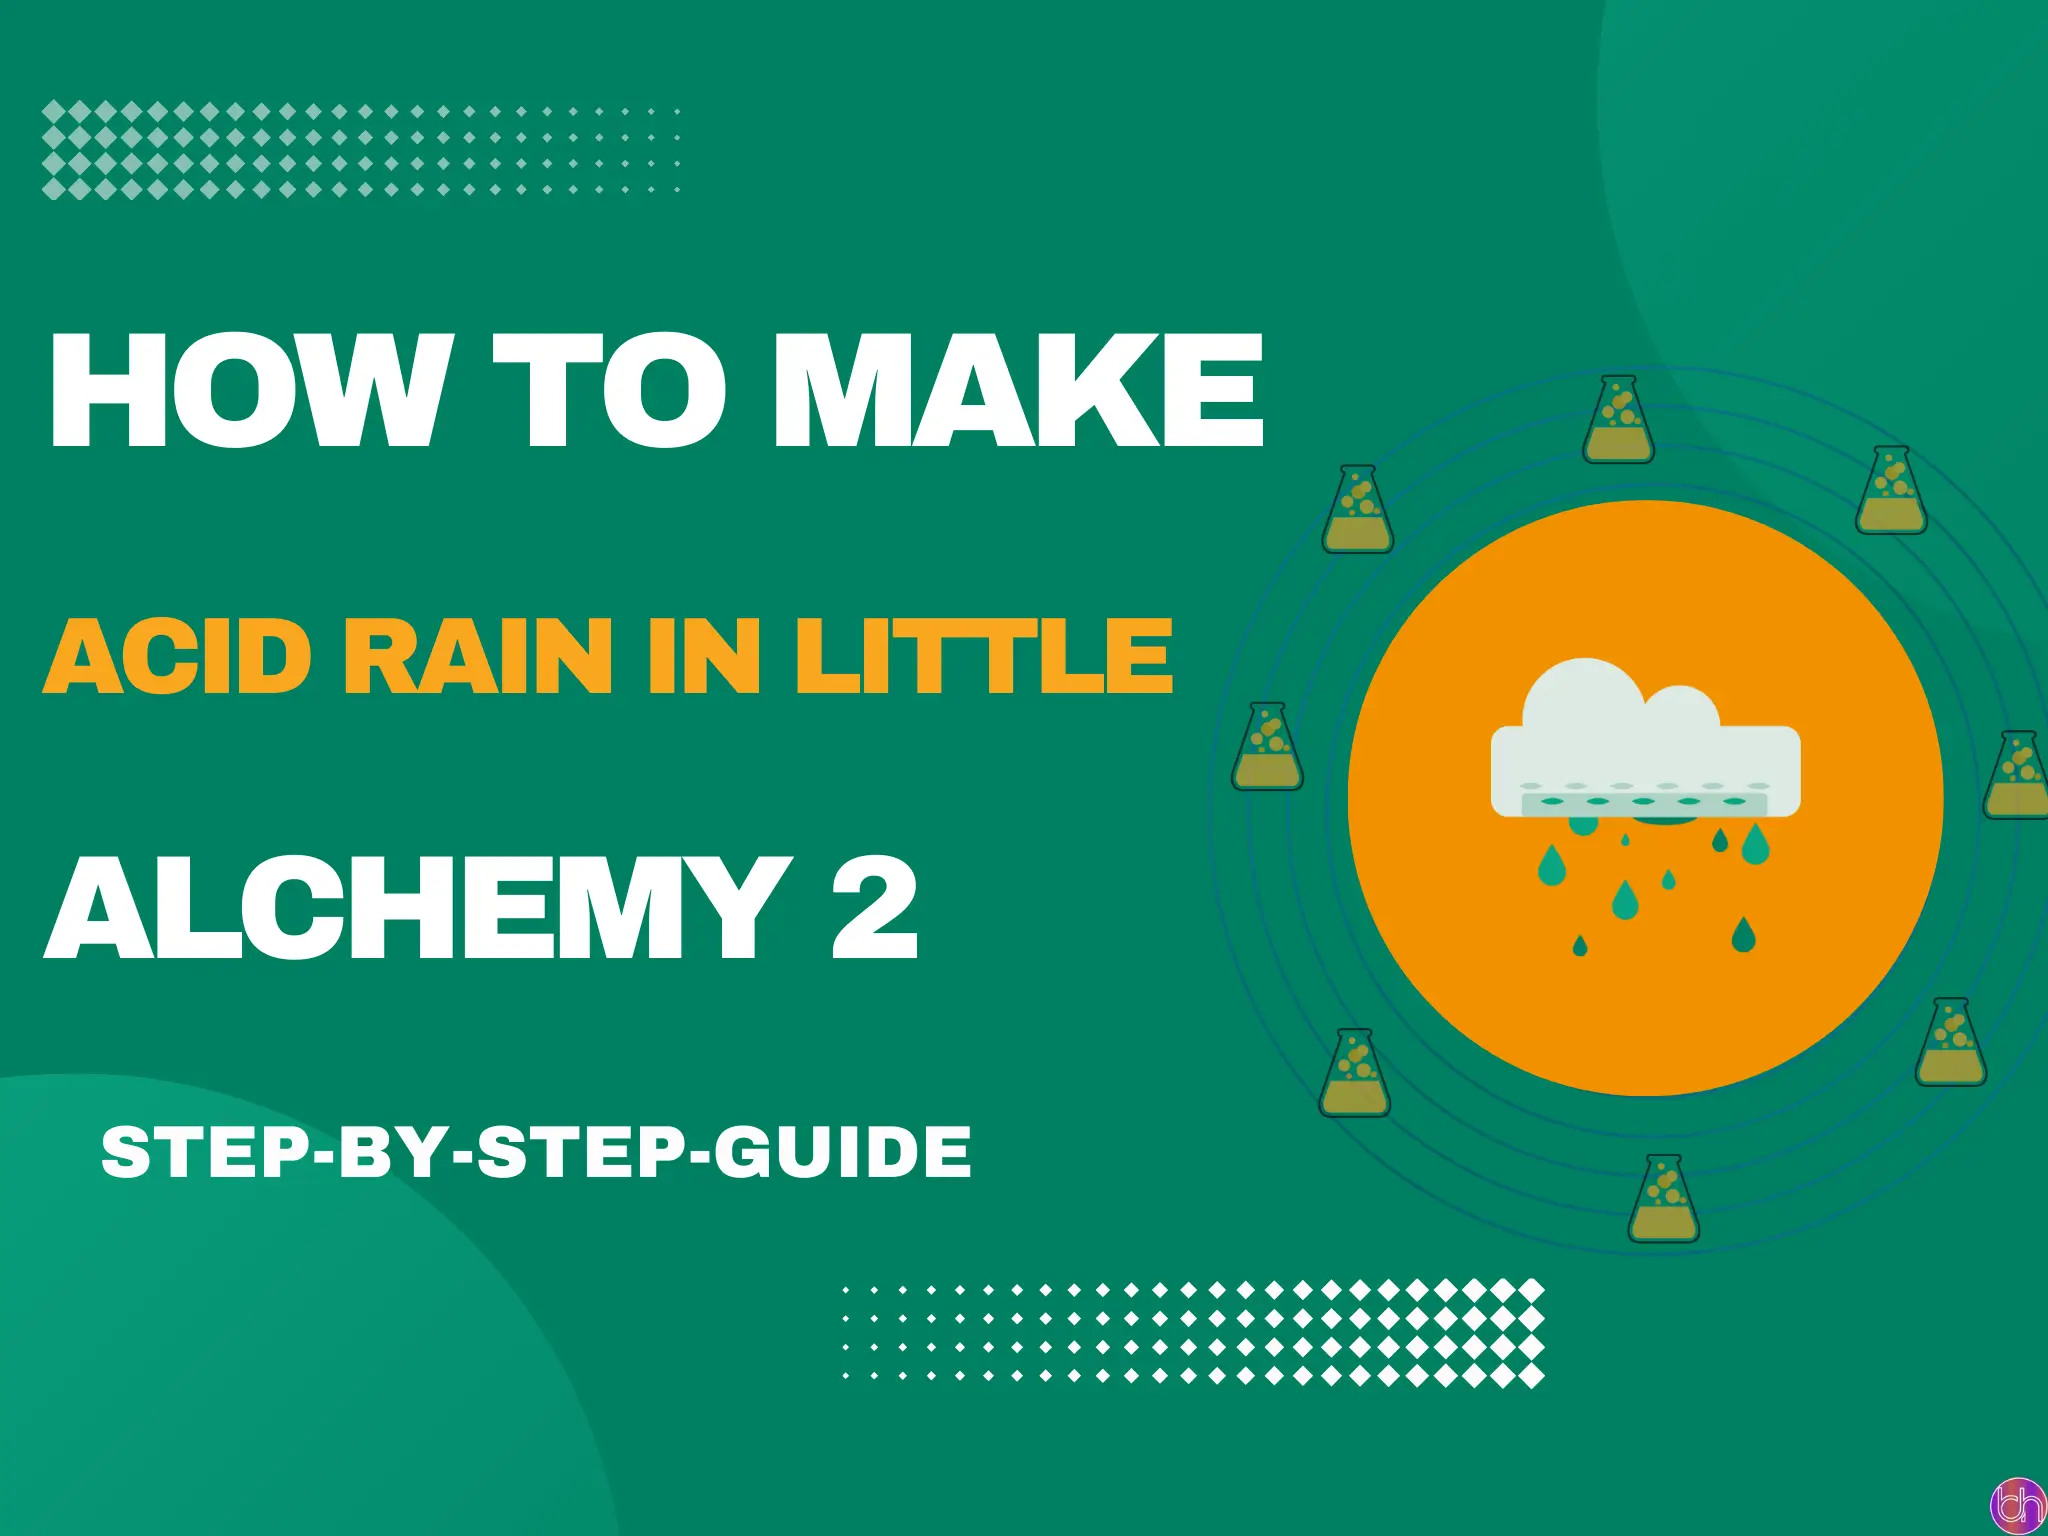 how to make acid rain in little alchemy 2